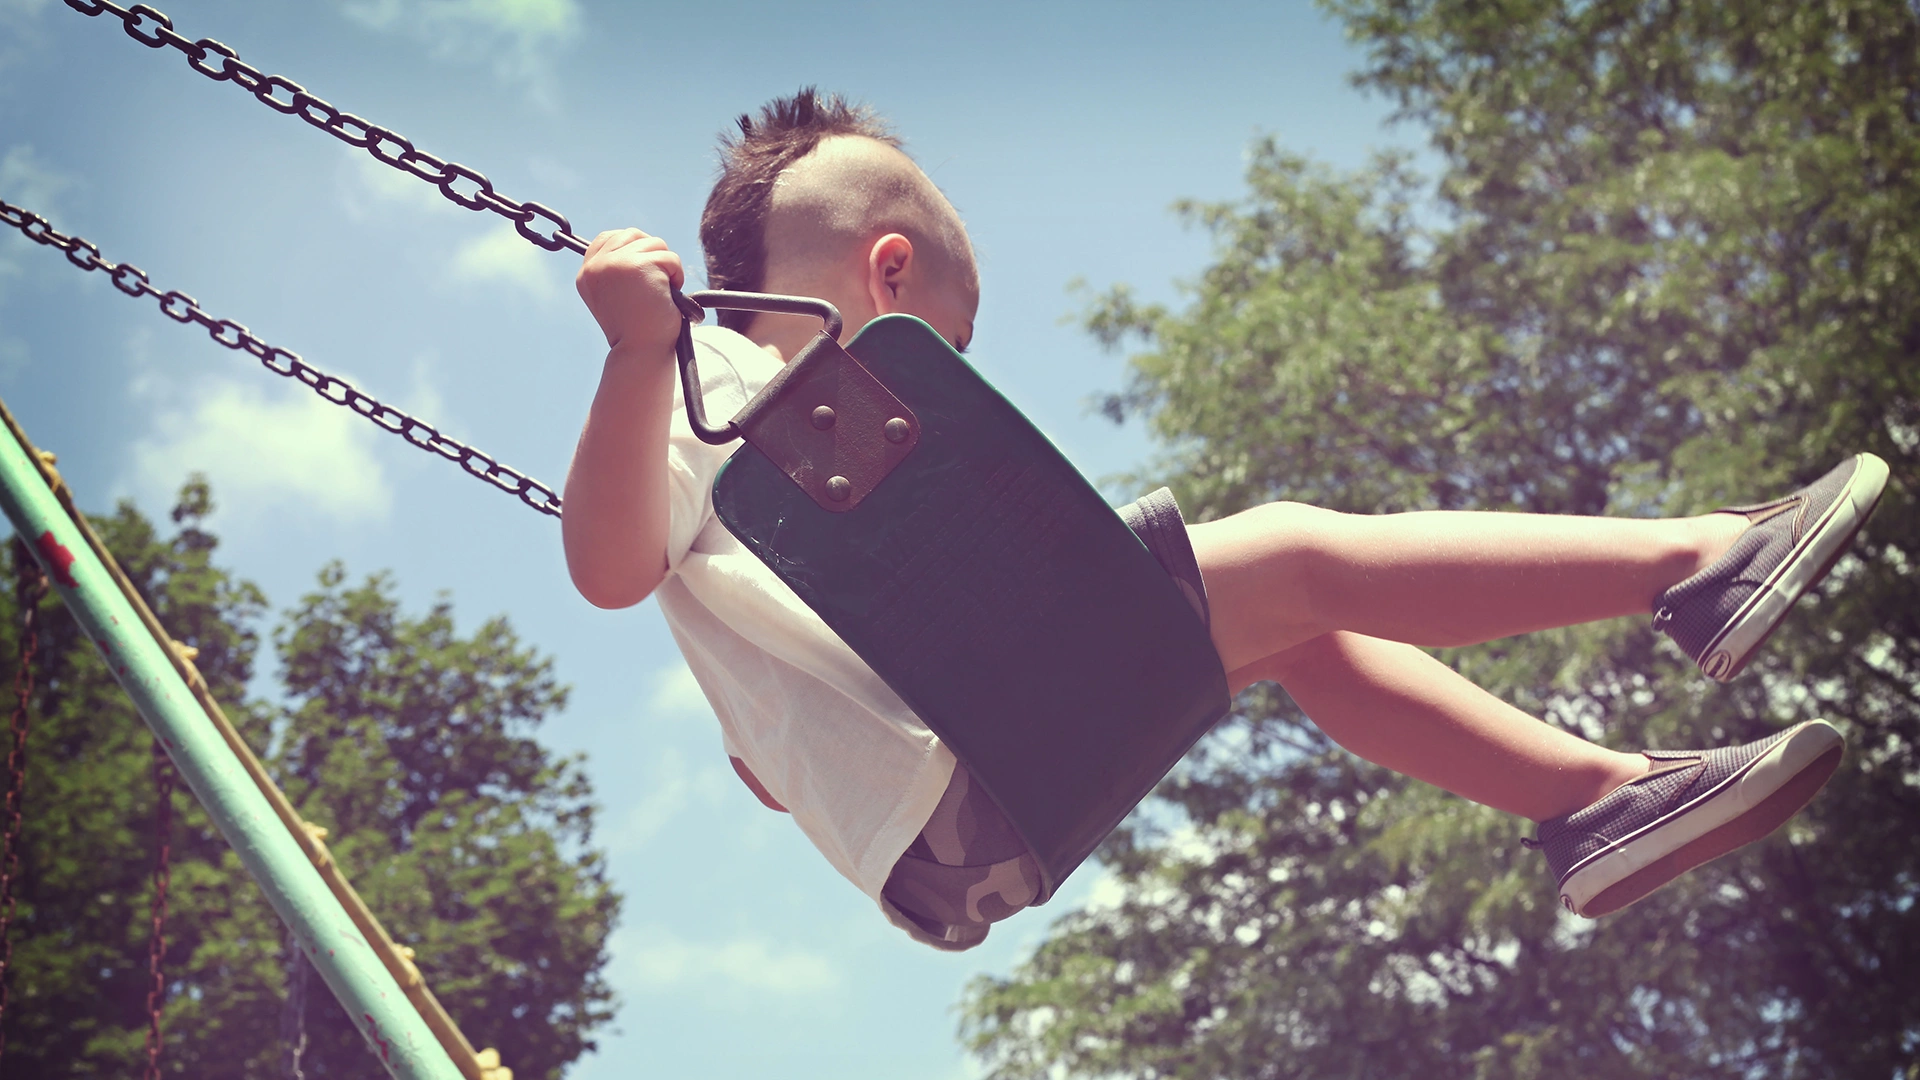 Young boy swinging on a swing